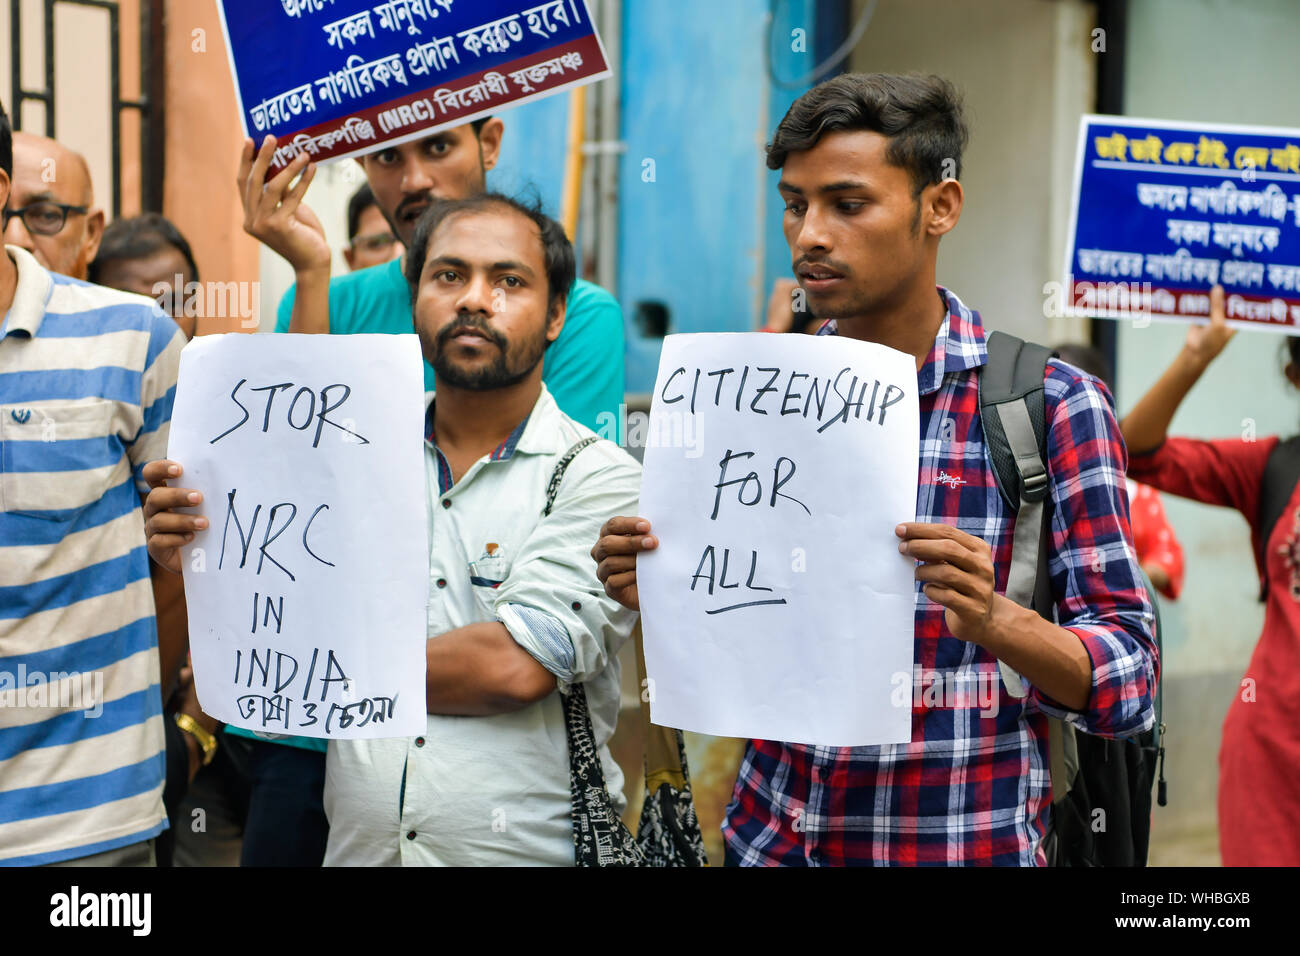 Protesters hold placards during a demonstration against National Register of Citizens (NRC) in kolkata.The National Register of Citizens (NRC), is the list of Indian citizens in Assam which is being updated to weed out illegal immigration from Bangladesh and neighbouring regions. Stock Photo